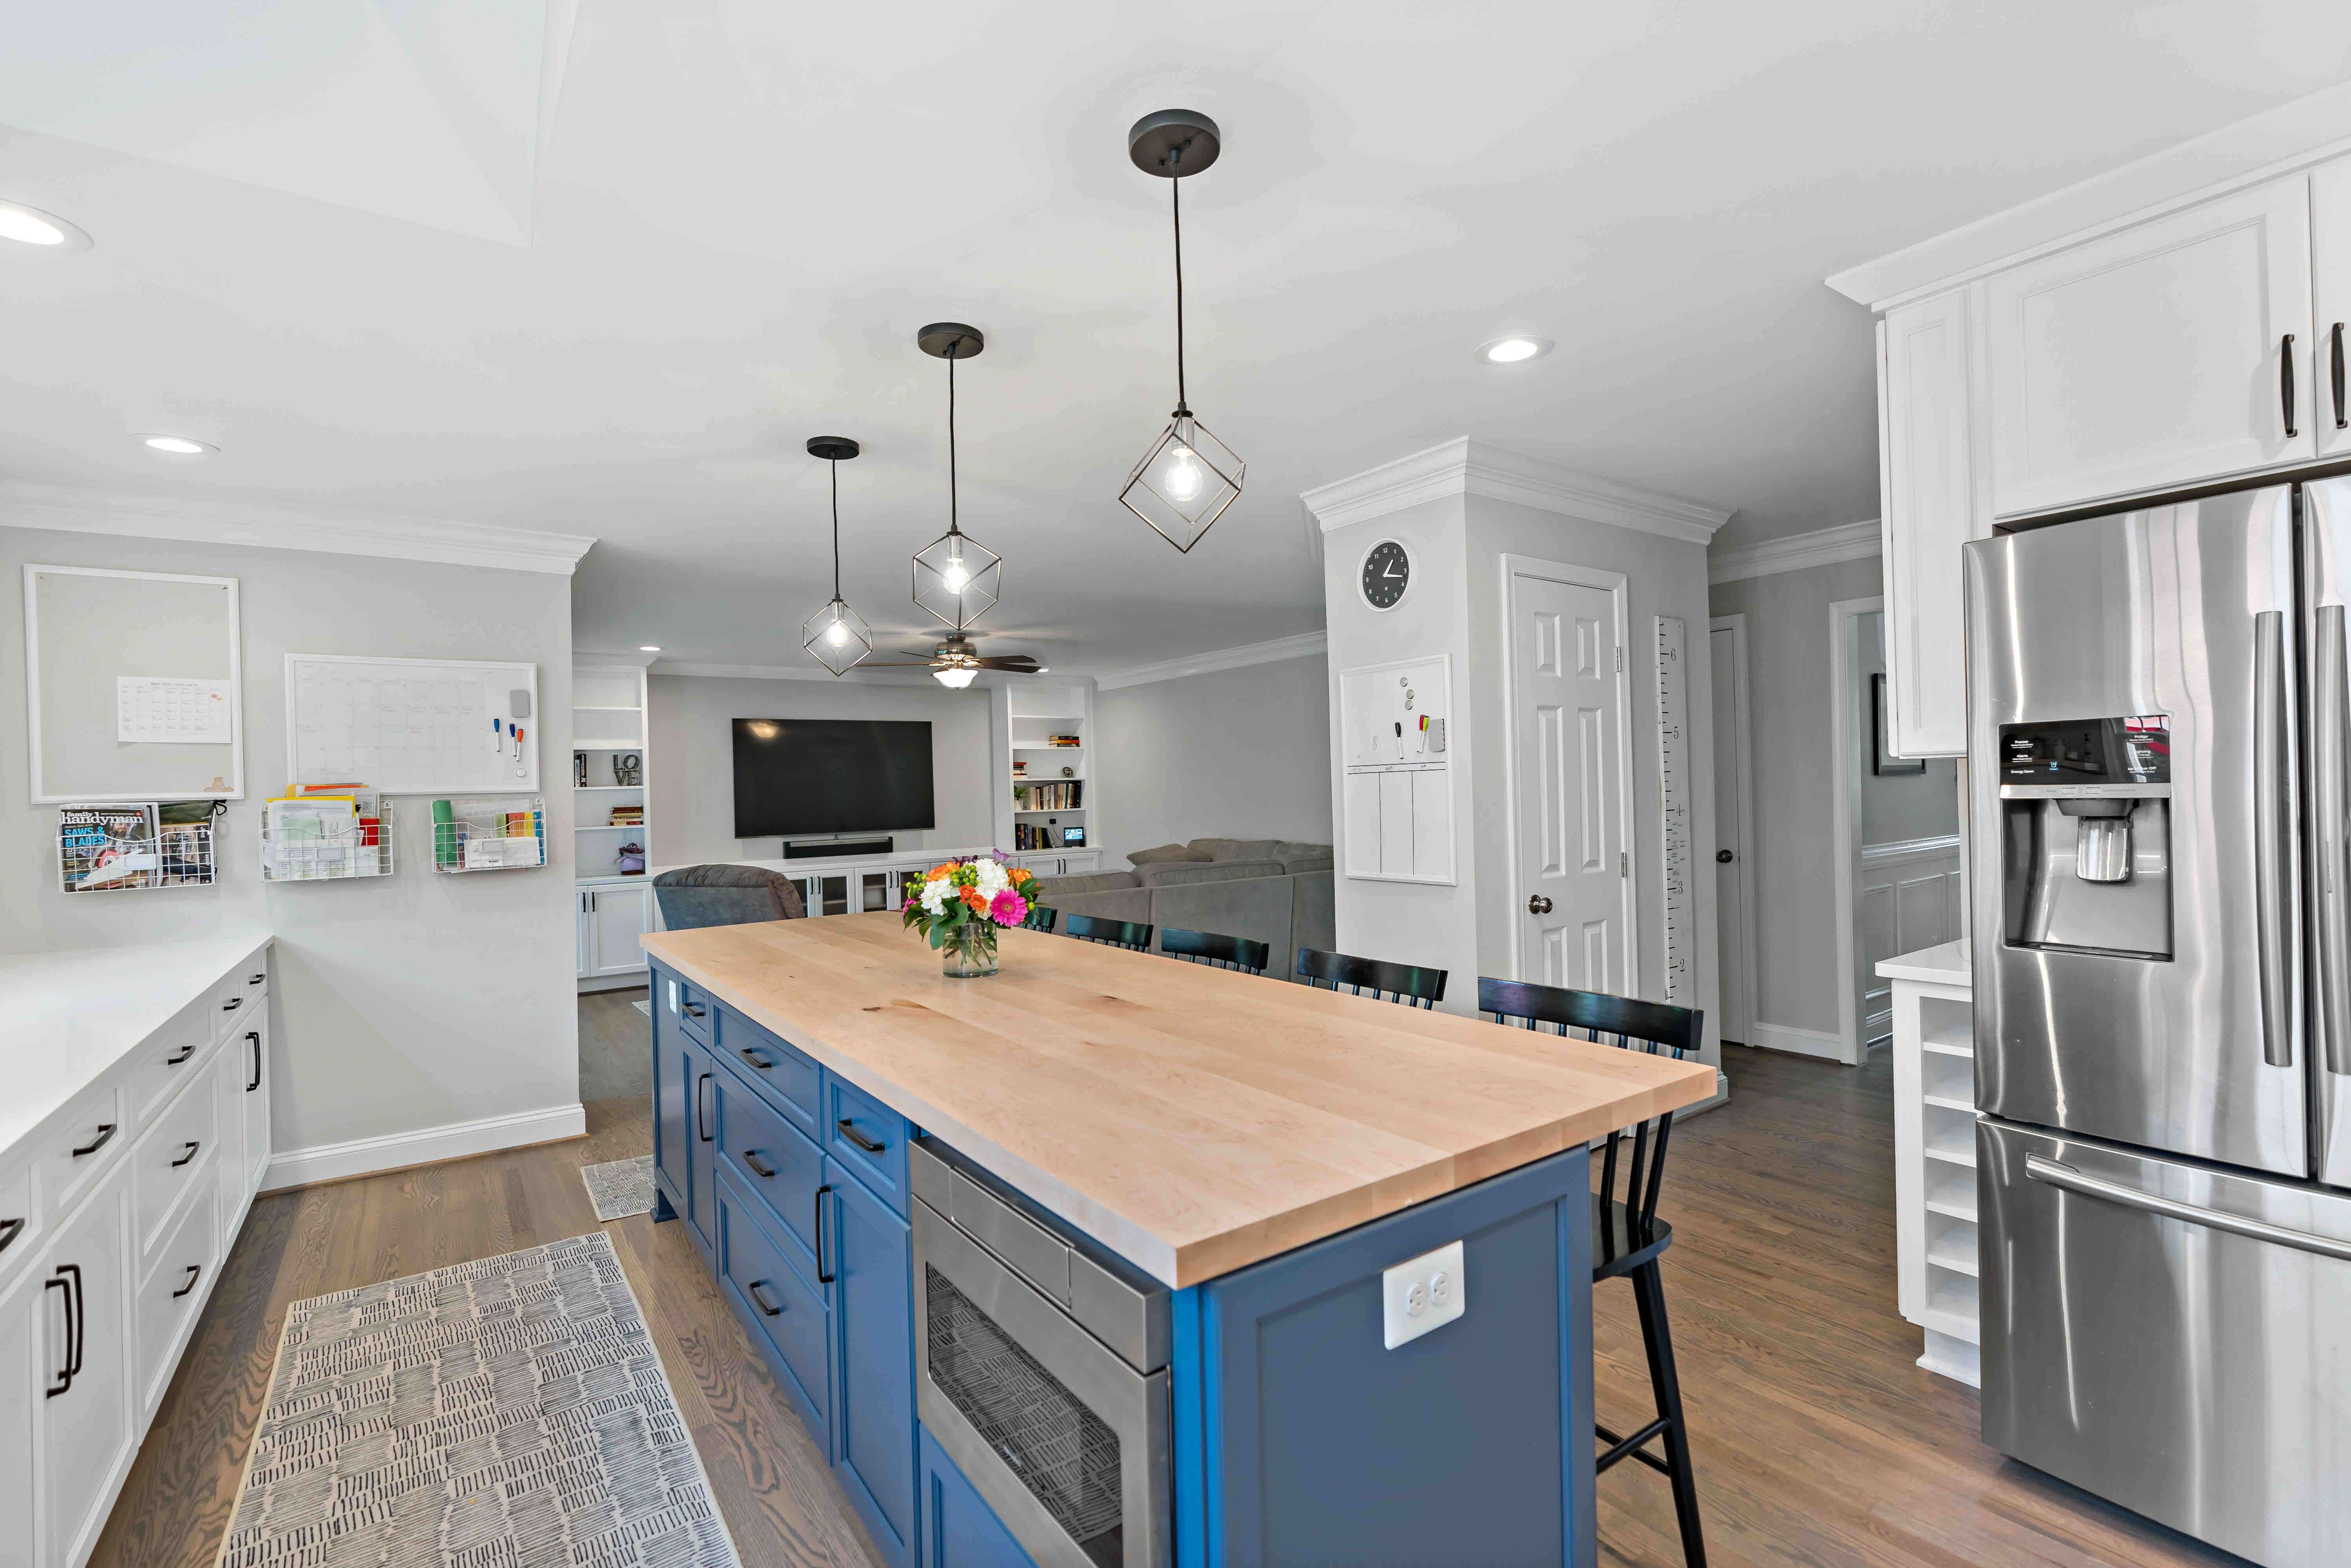 Blue kitchen island with three pendants for lighting above